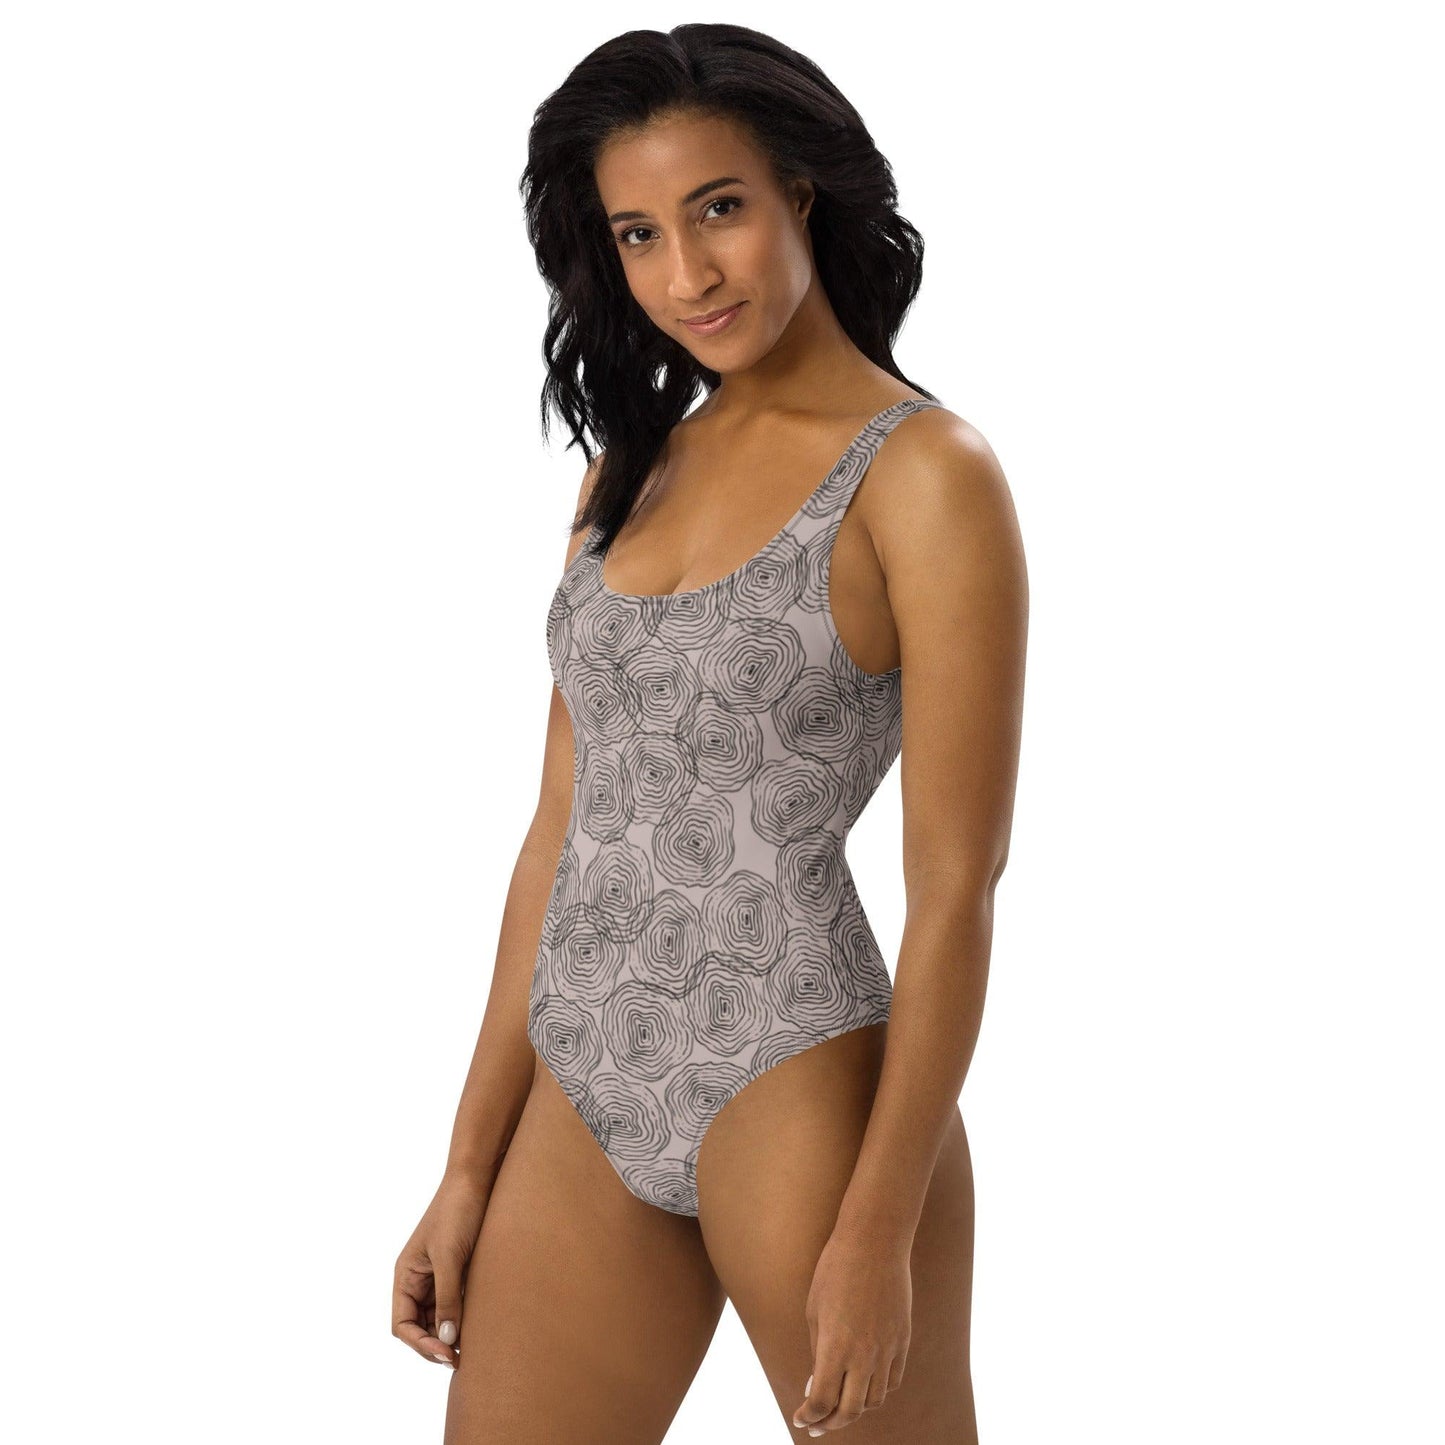 Ripple in Gray One-piece Swimsuit - Solshine and Co